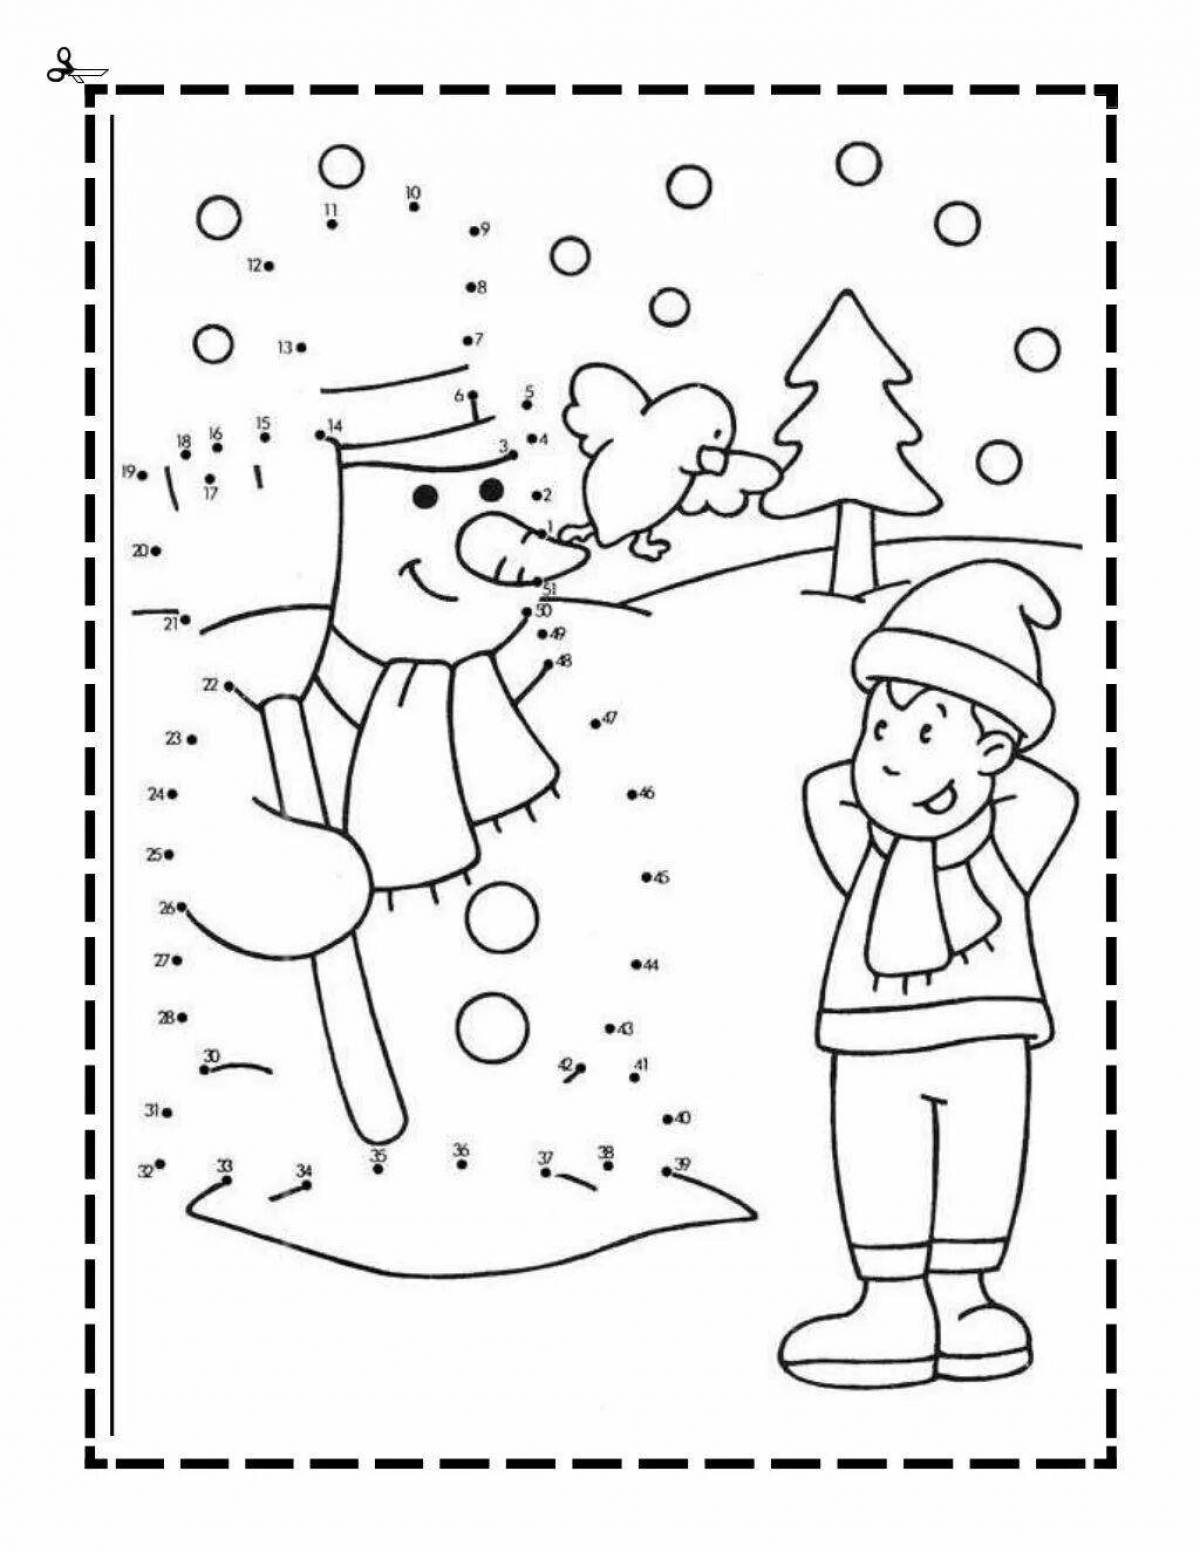 Adorable snowman coloring by numbers